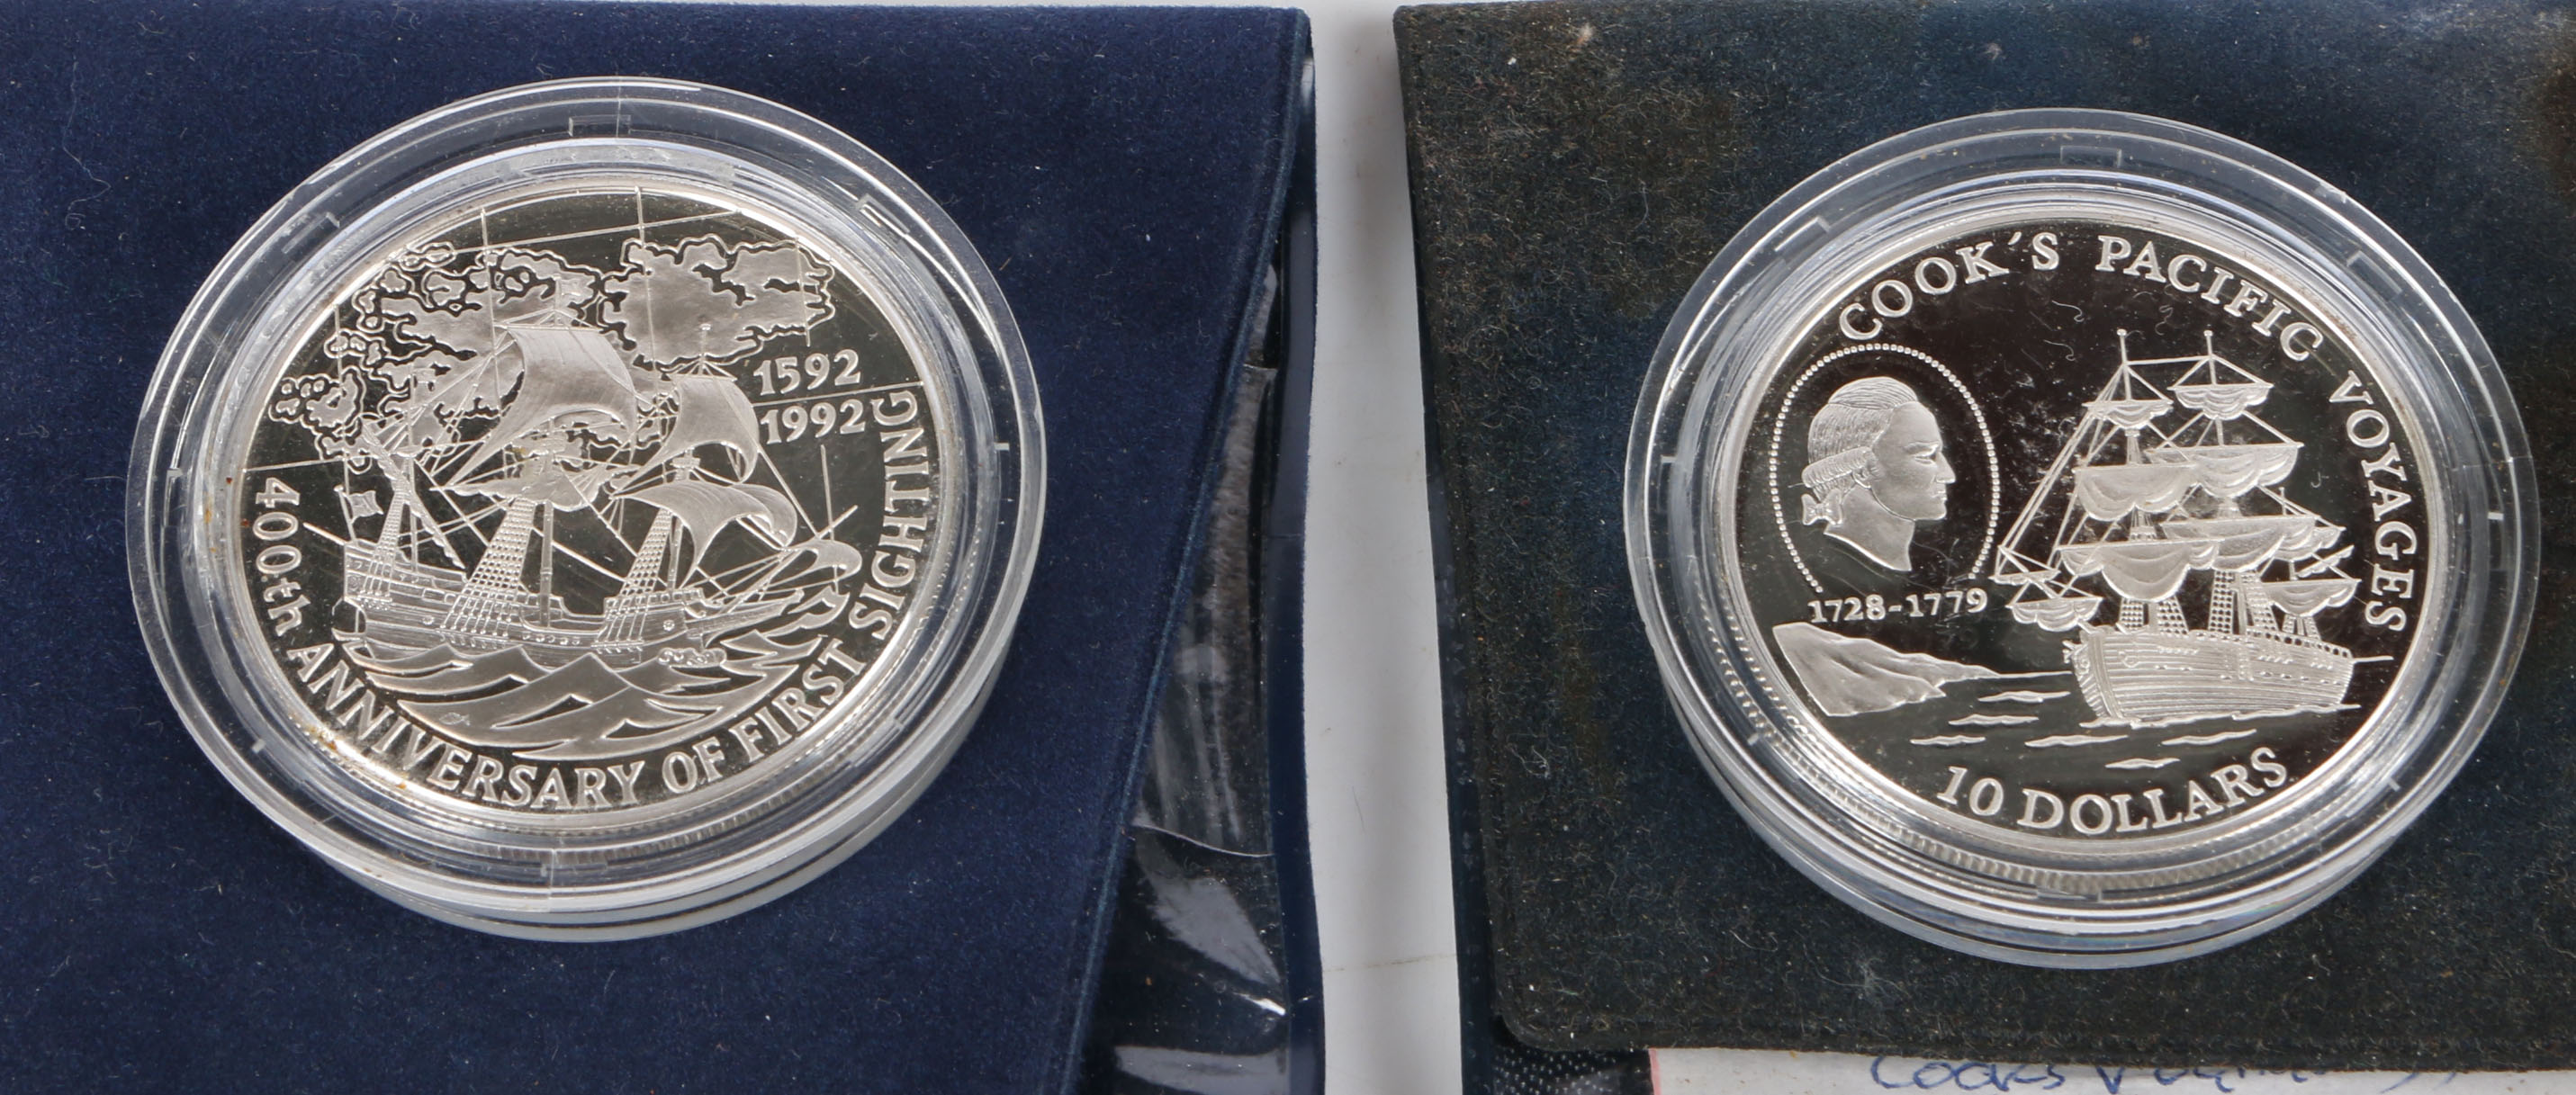 Niue silver proof 10 dollar coin 1992, Cooks Pacific Voyages, Falkland Islands silver proof £5